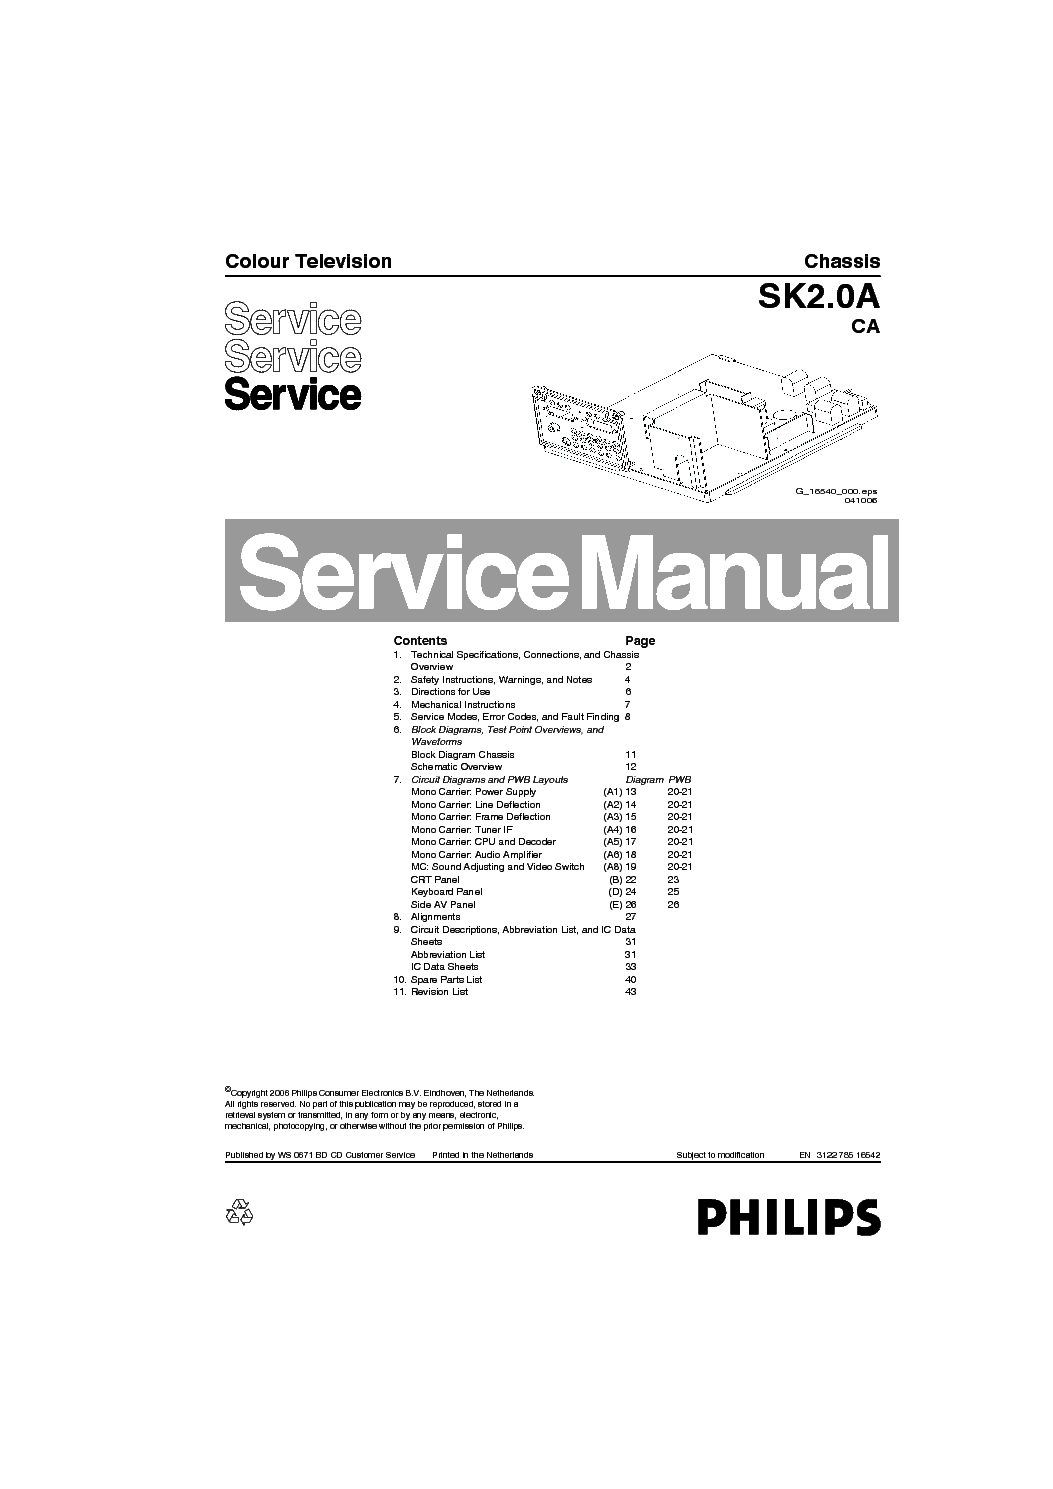 PHILIPS SK2.0A CA CHASSIS SM service manual (1st page)